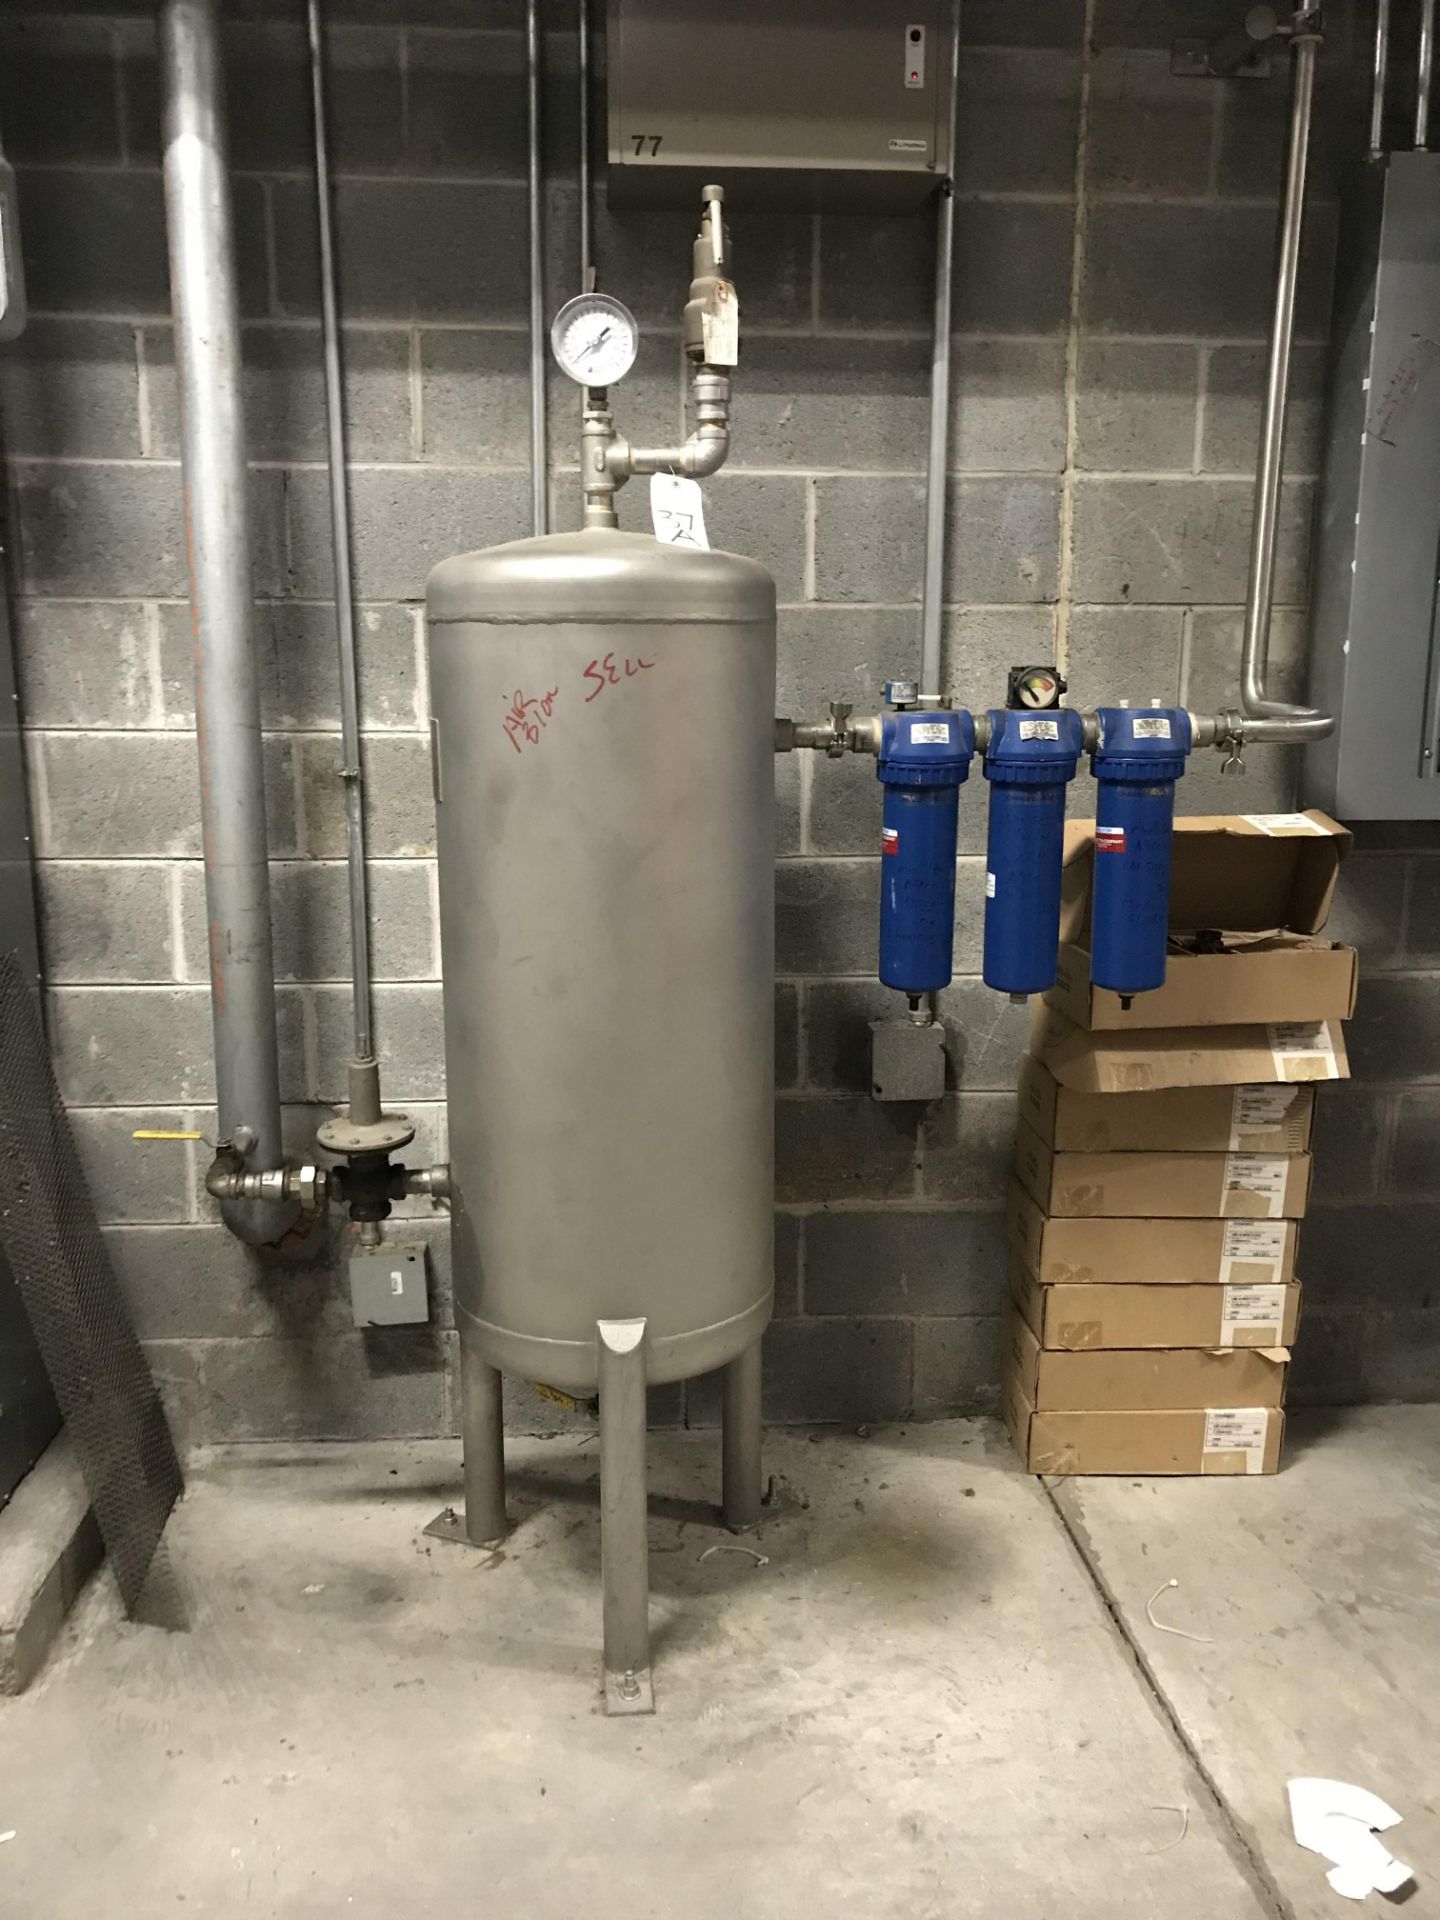 Stainless Steel Pressure Vessel For Air Blow Down System | Rig Fee: $150